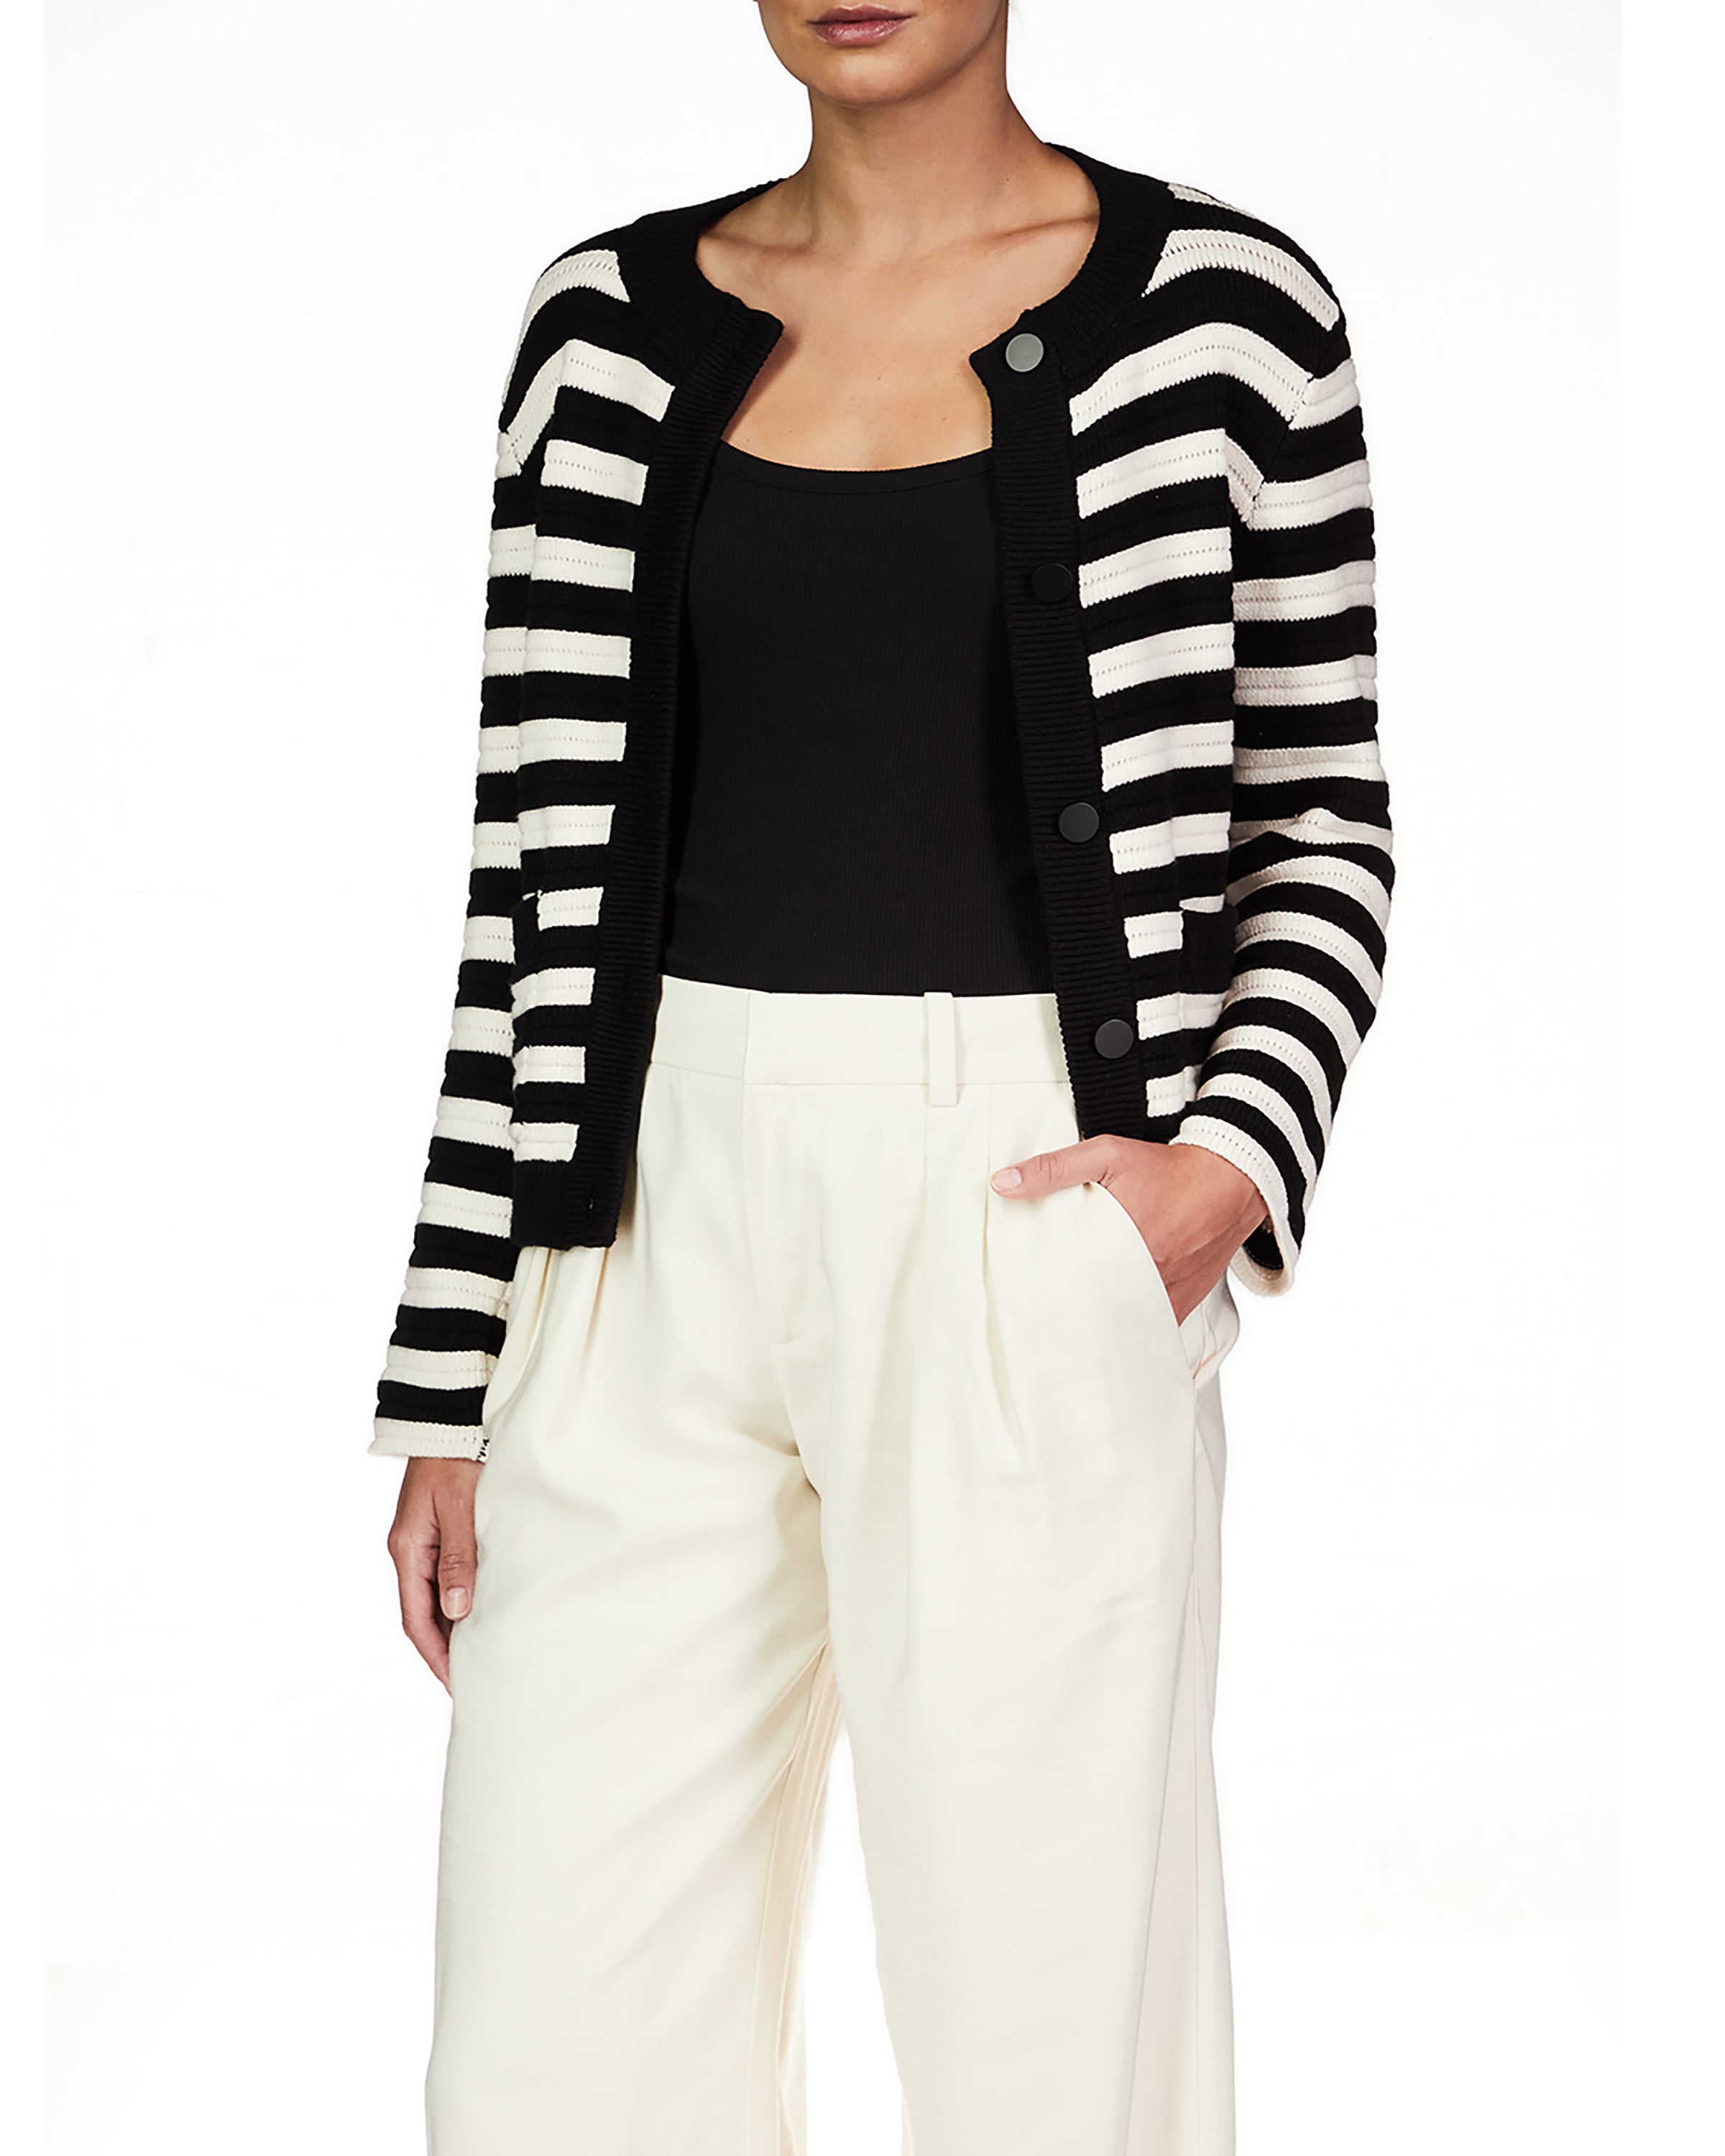 Sanctuary Knitted Jacket in Chalk and Black Stripe